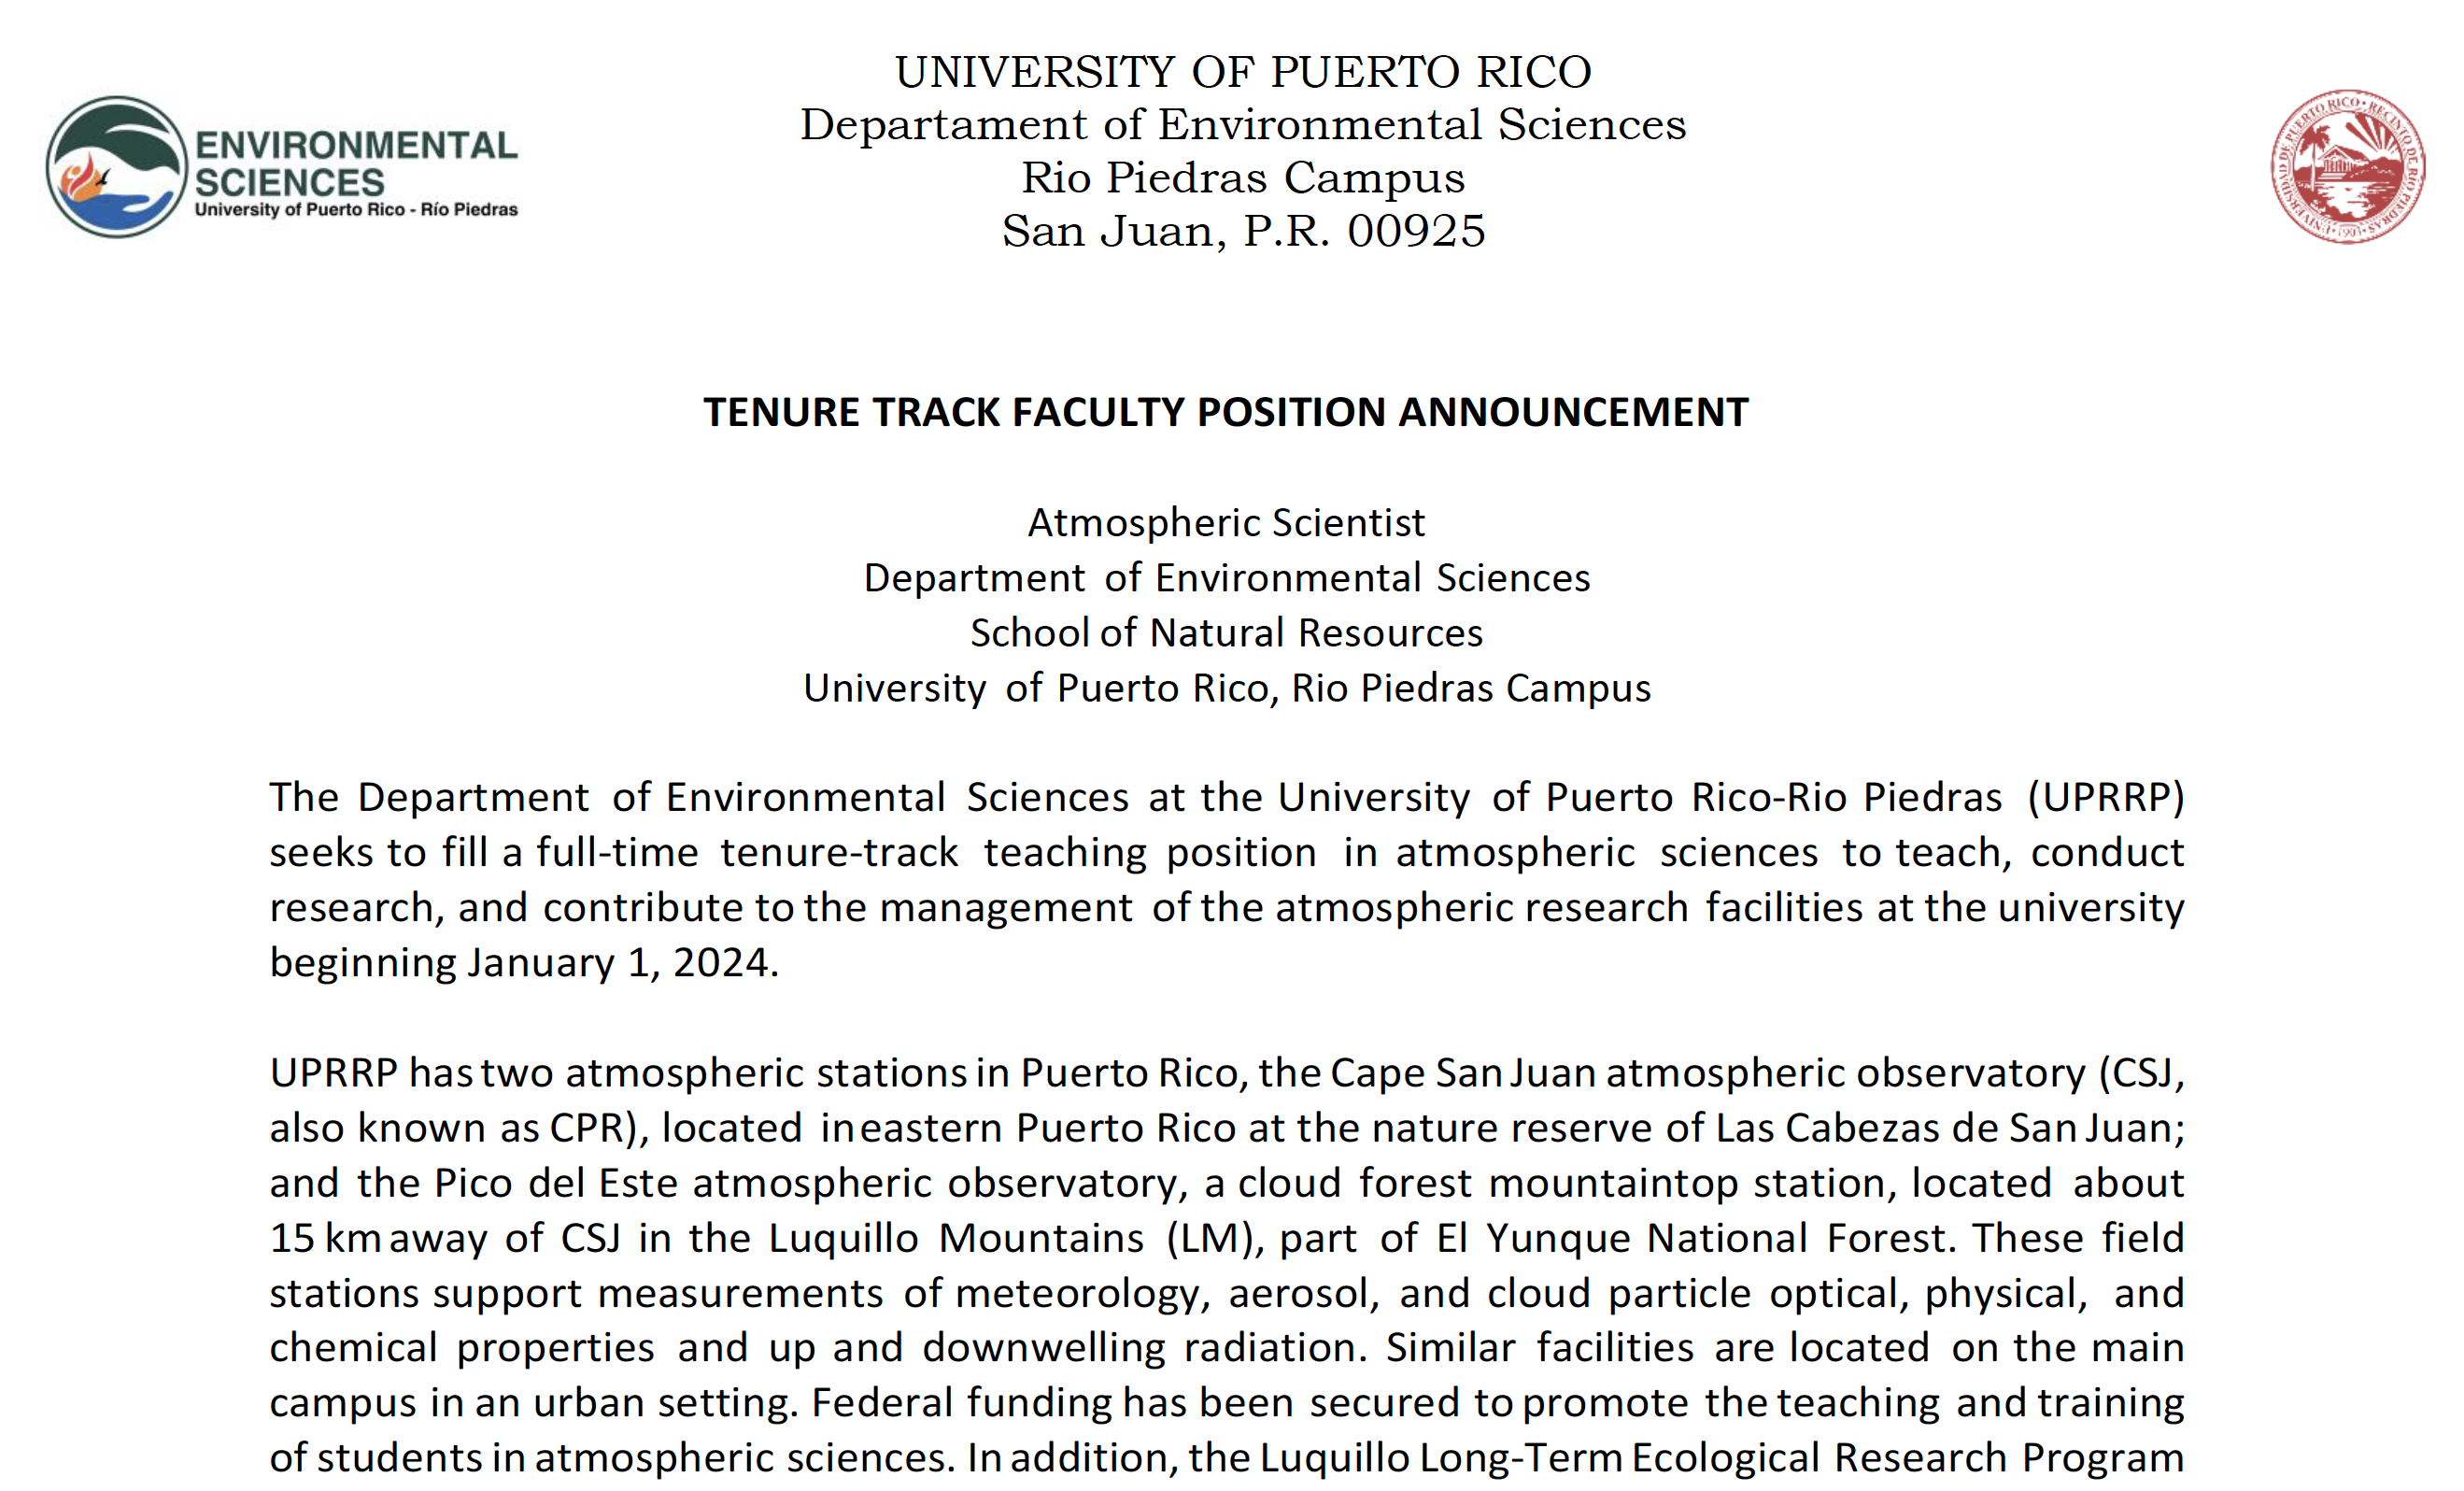 TENURE TRACK FACULTY POSITION ANNOUNCEMENT